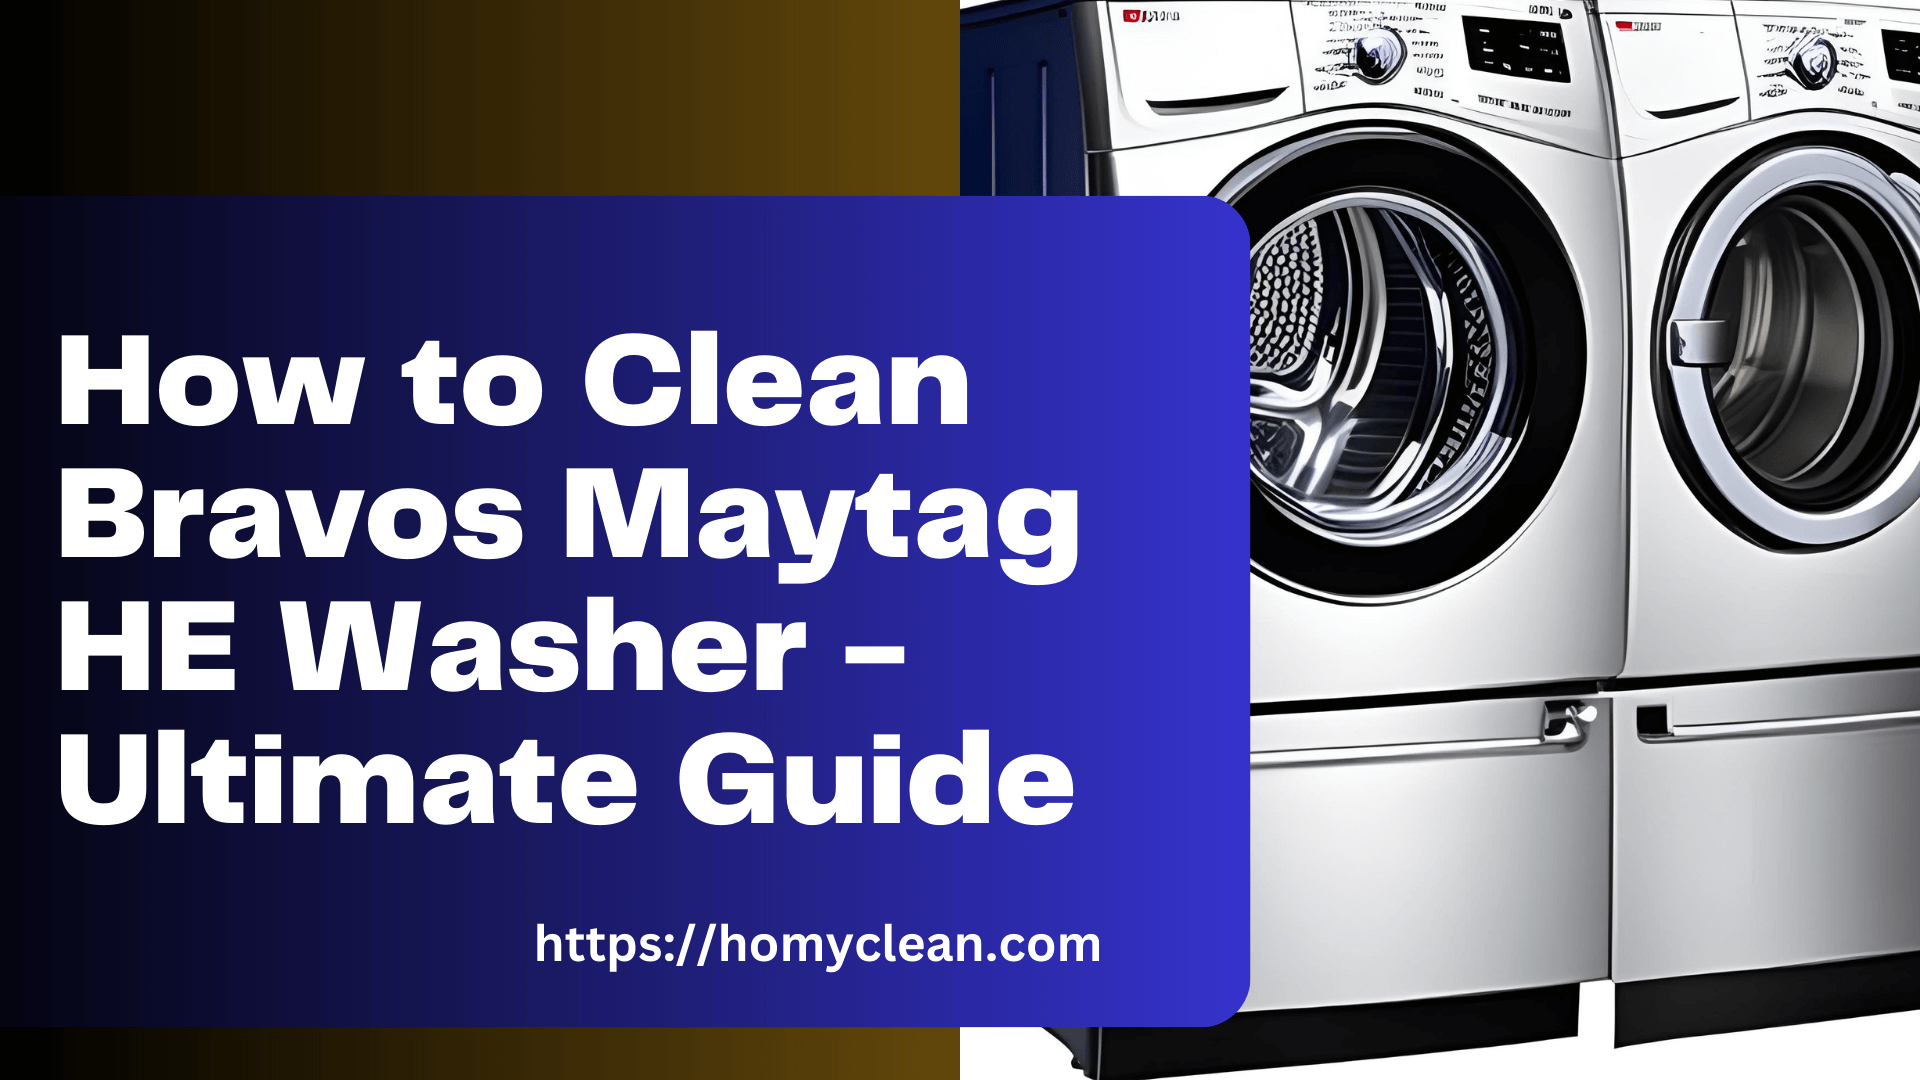 8 Lifetime Ways How To Clean Bravos Maytag HE Washer | Expert Guide